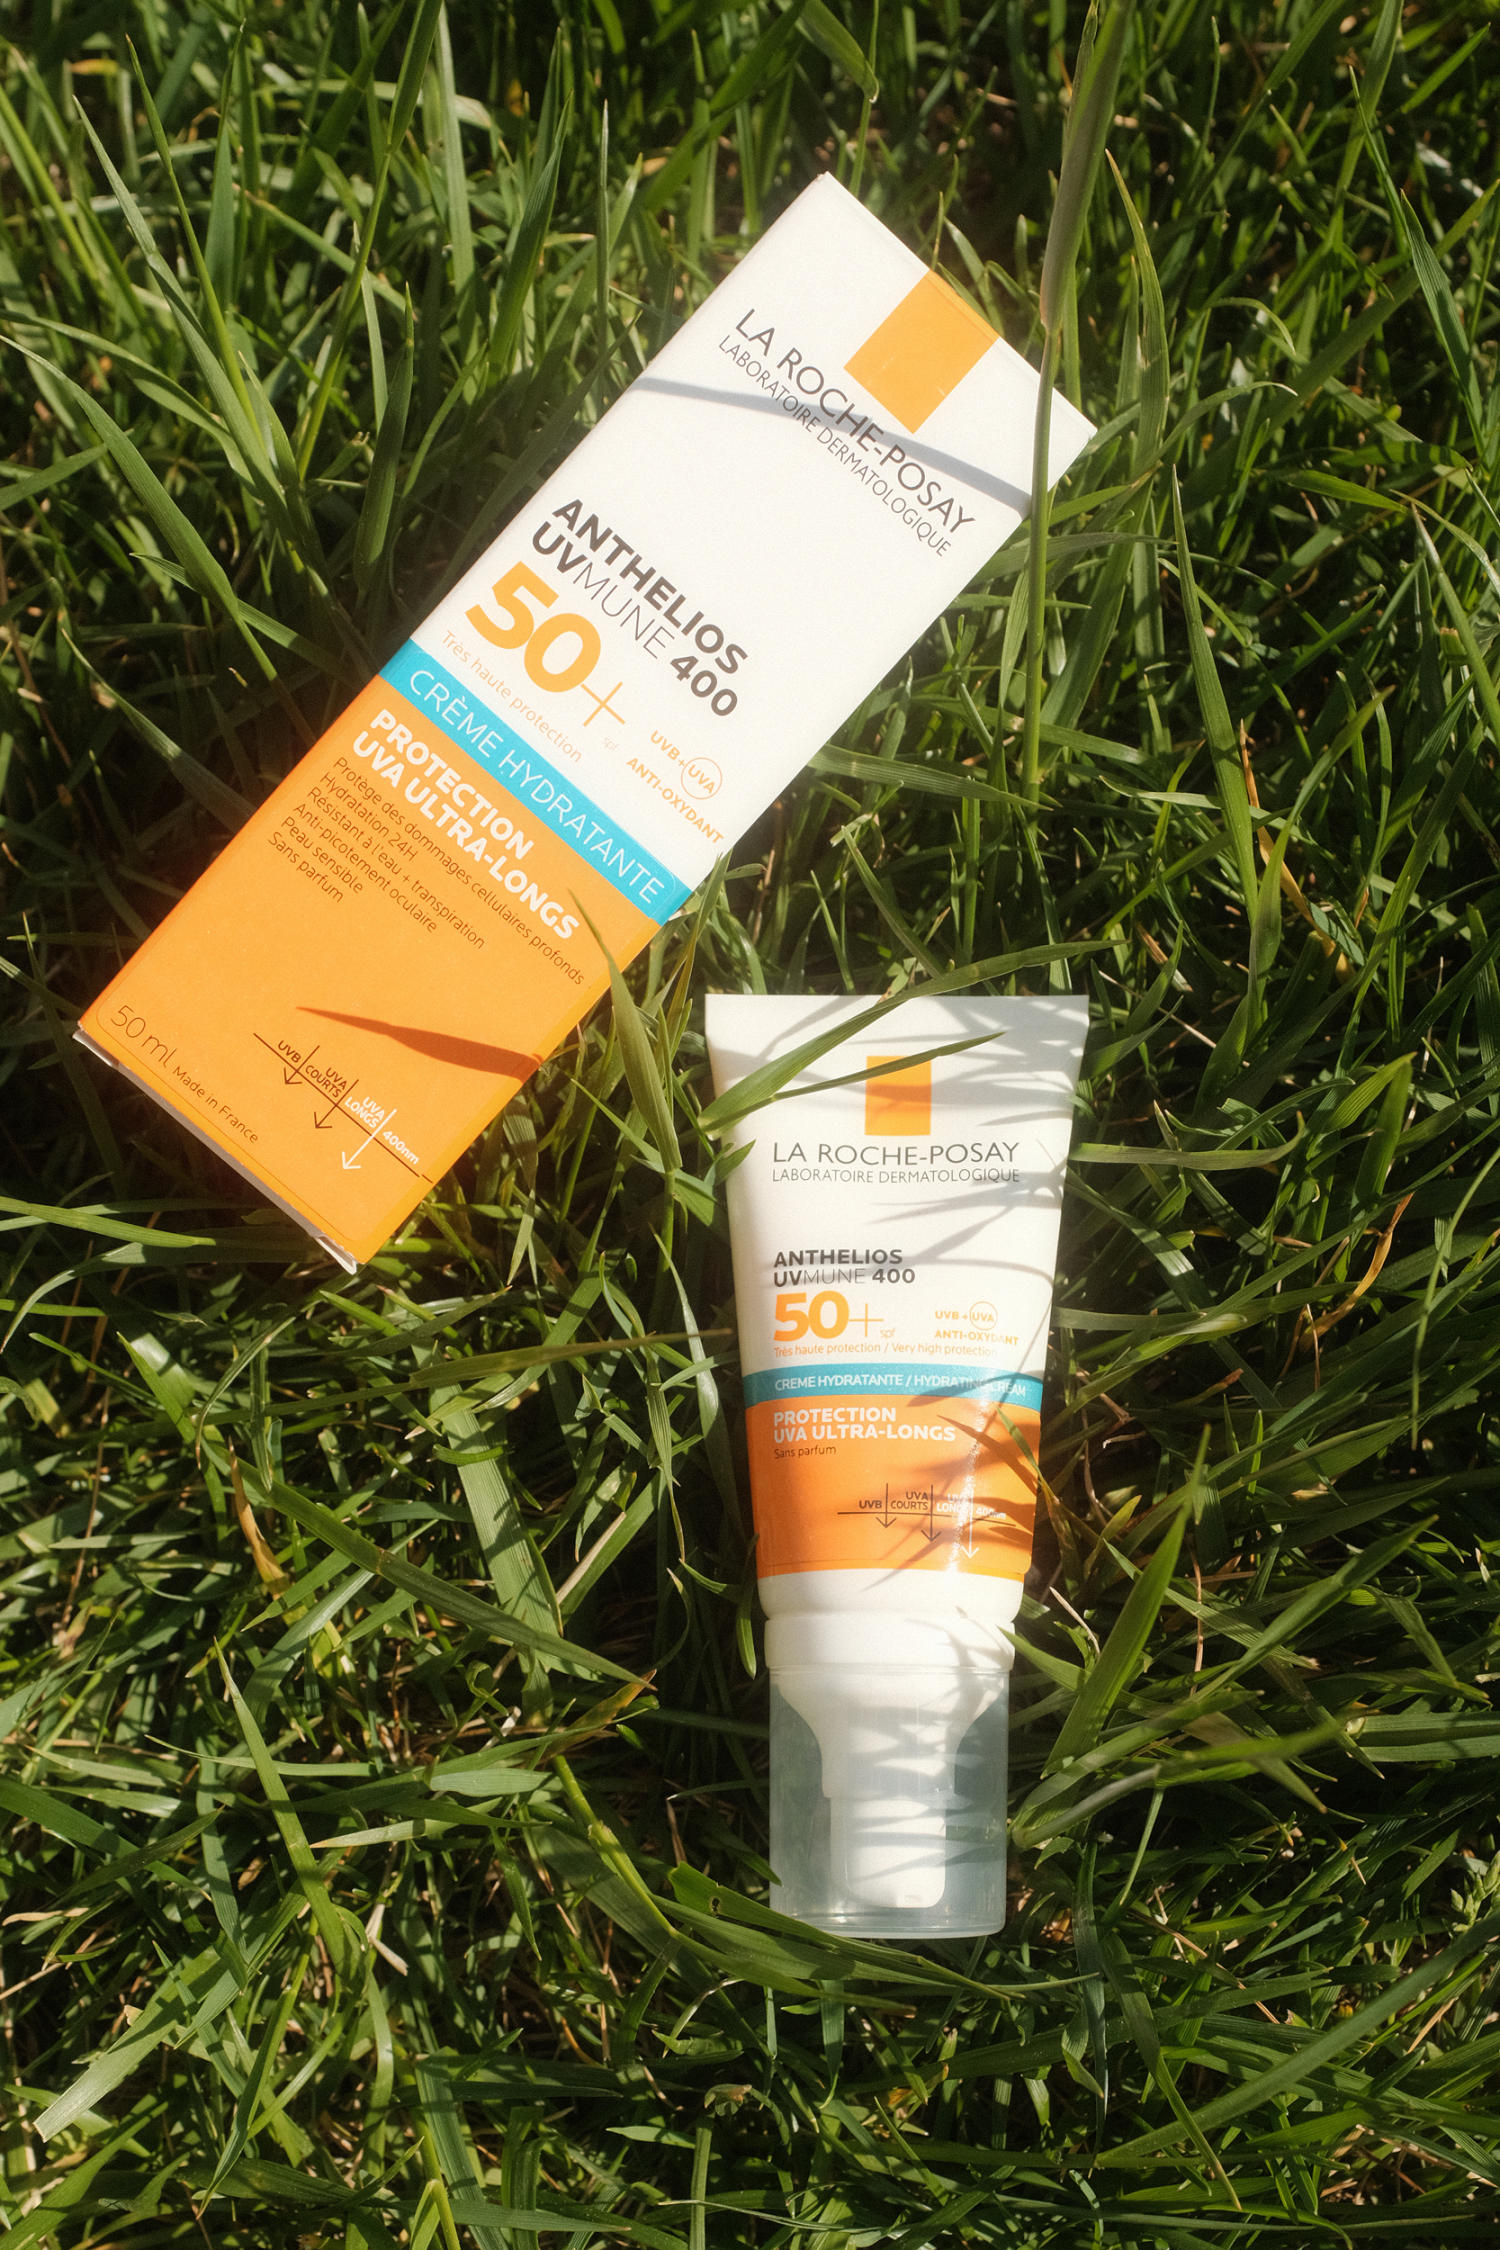 What's keeping the U.S. from allowing better sunscreens?